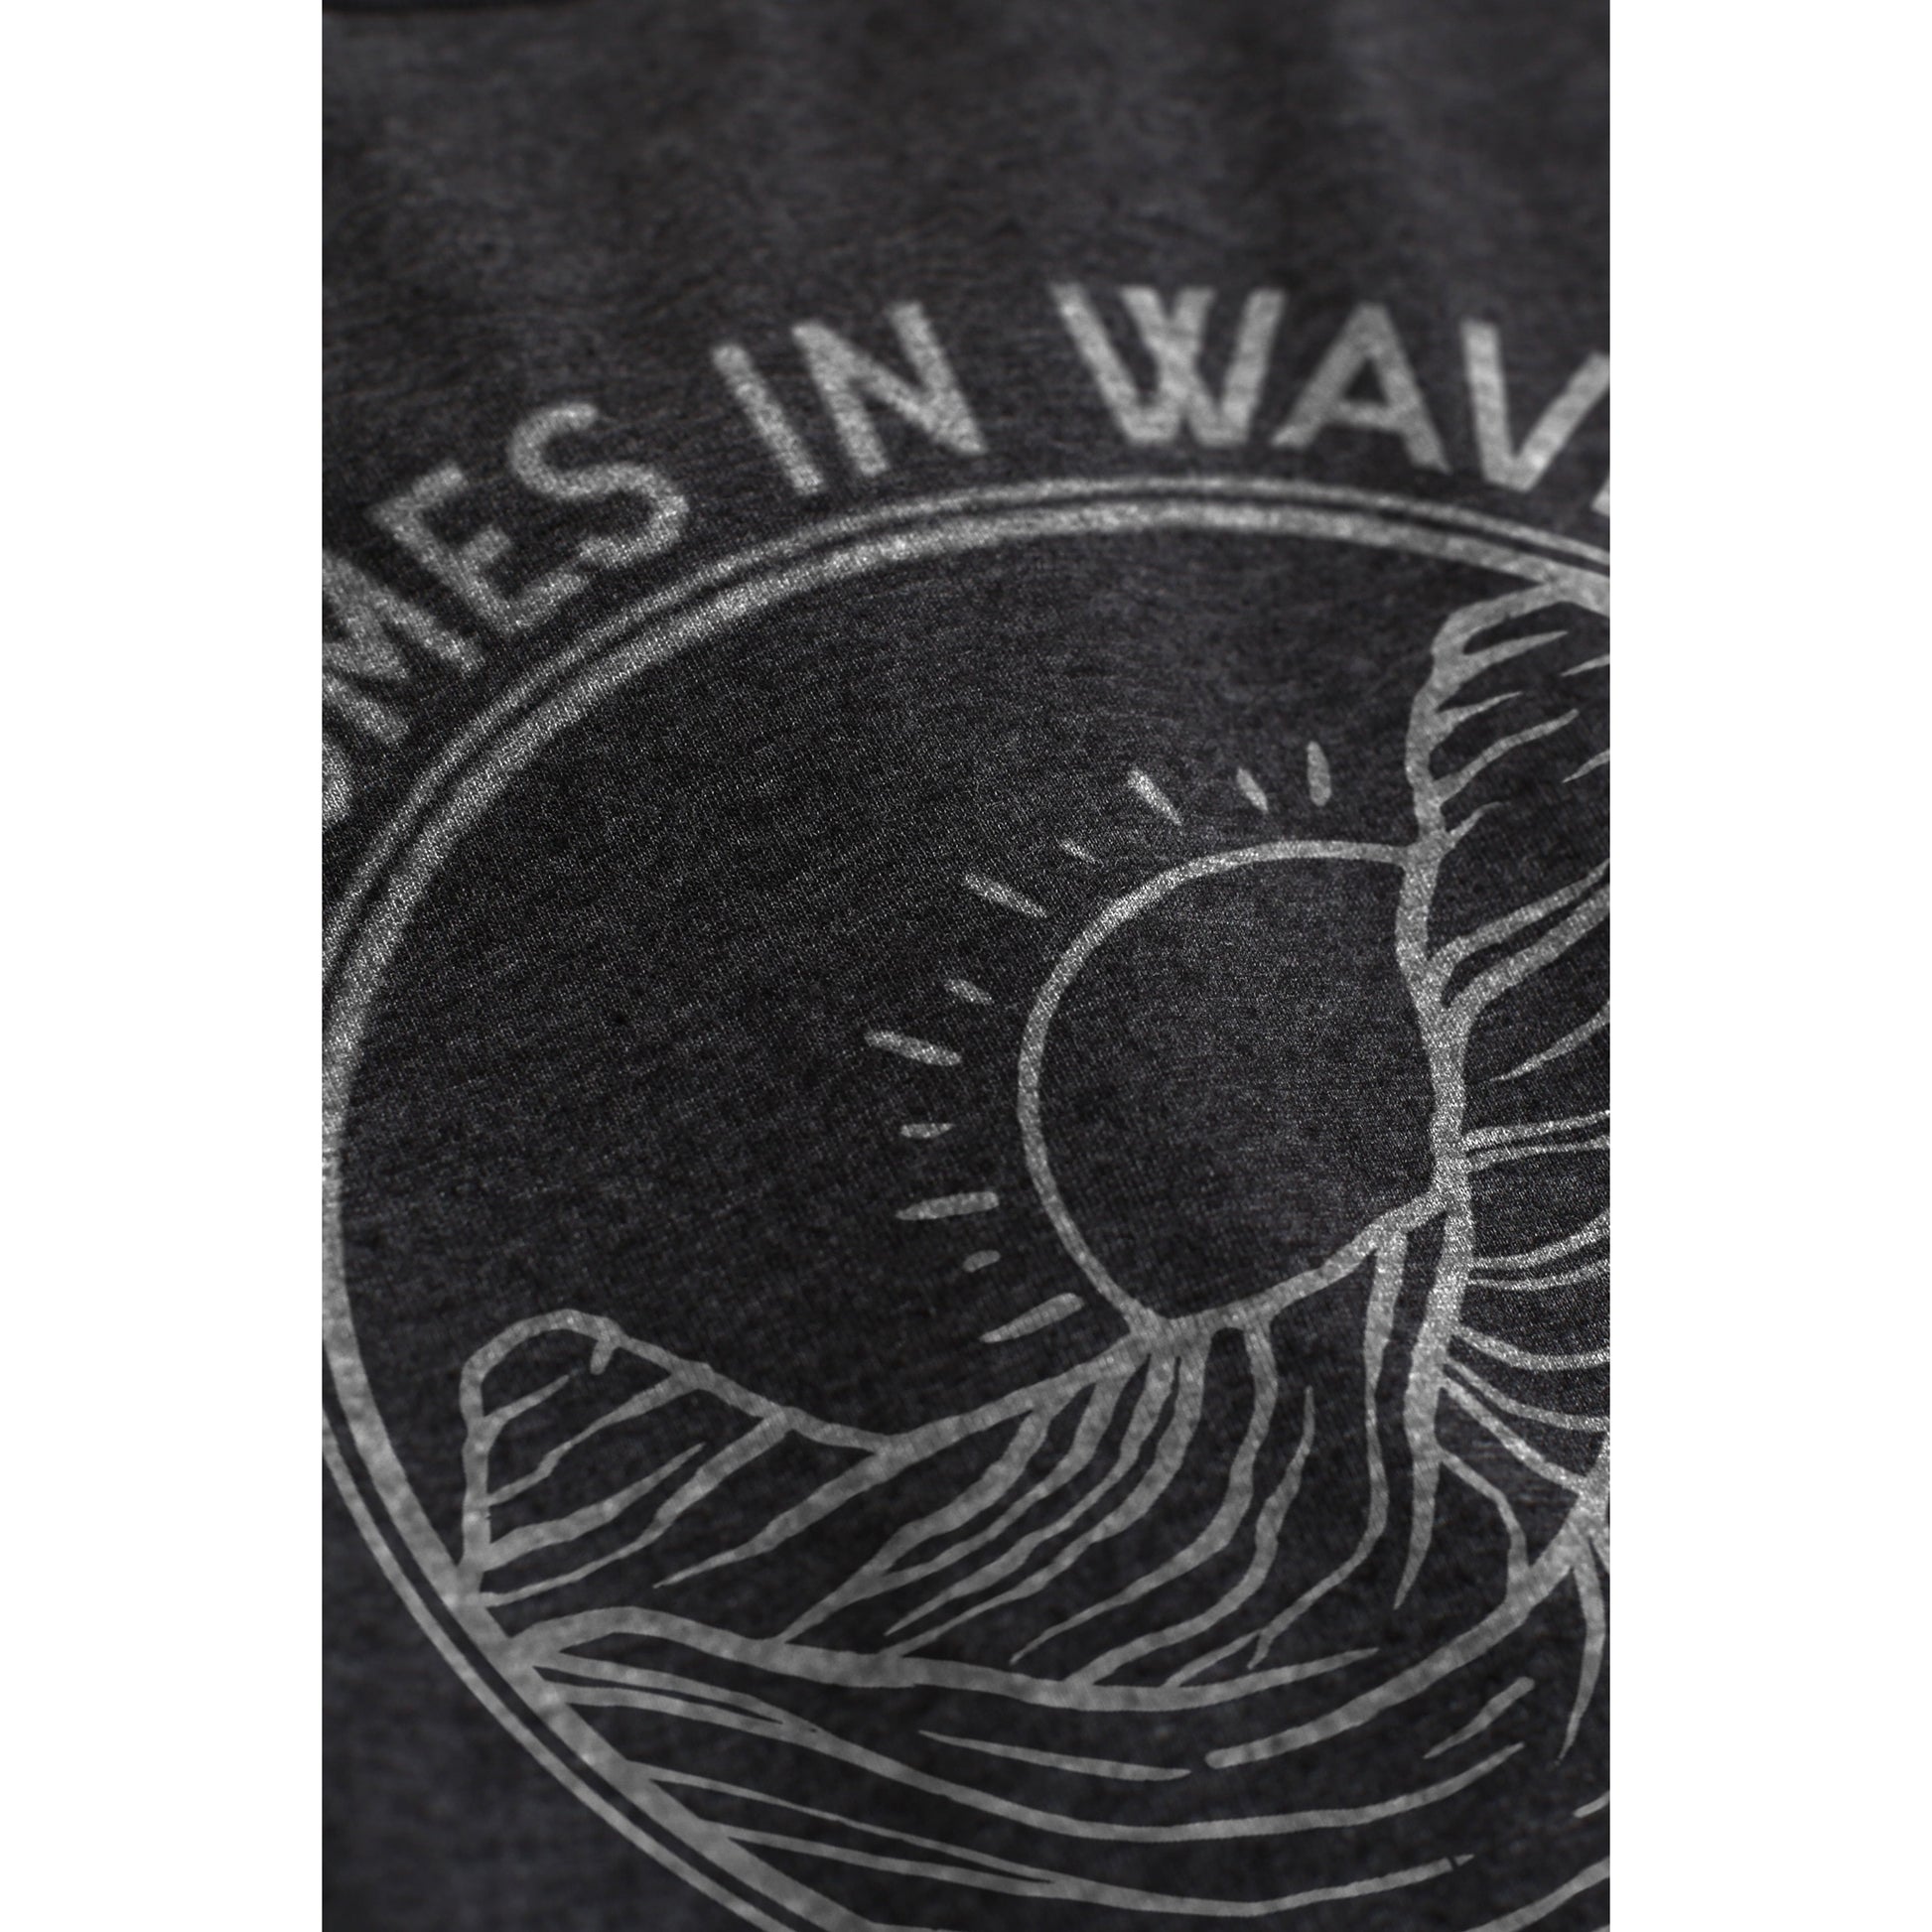 Life Comes In Waves Learn To Ride It - The Wave, Coyote Buttes - thread tank | Stories you can wear.